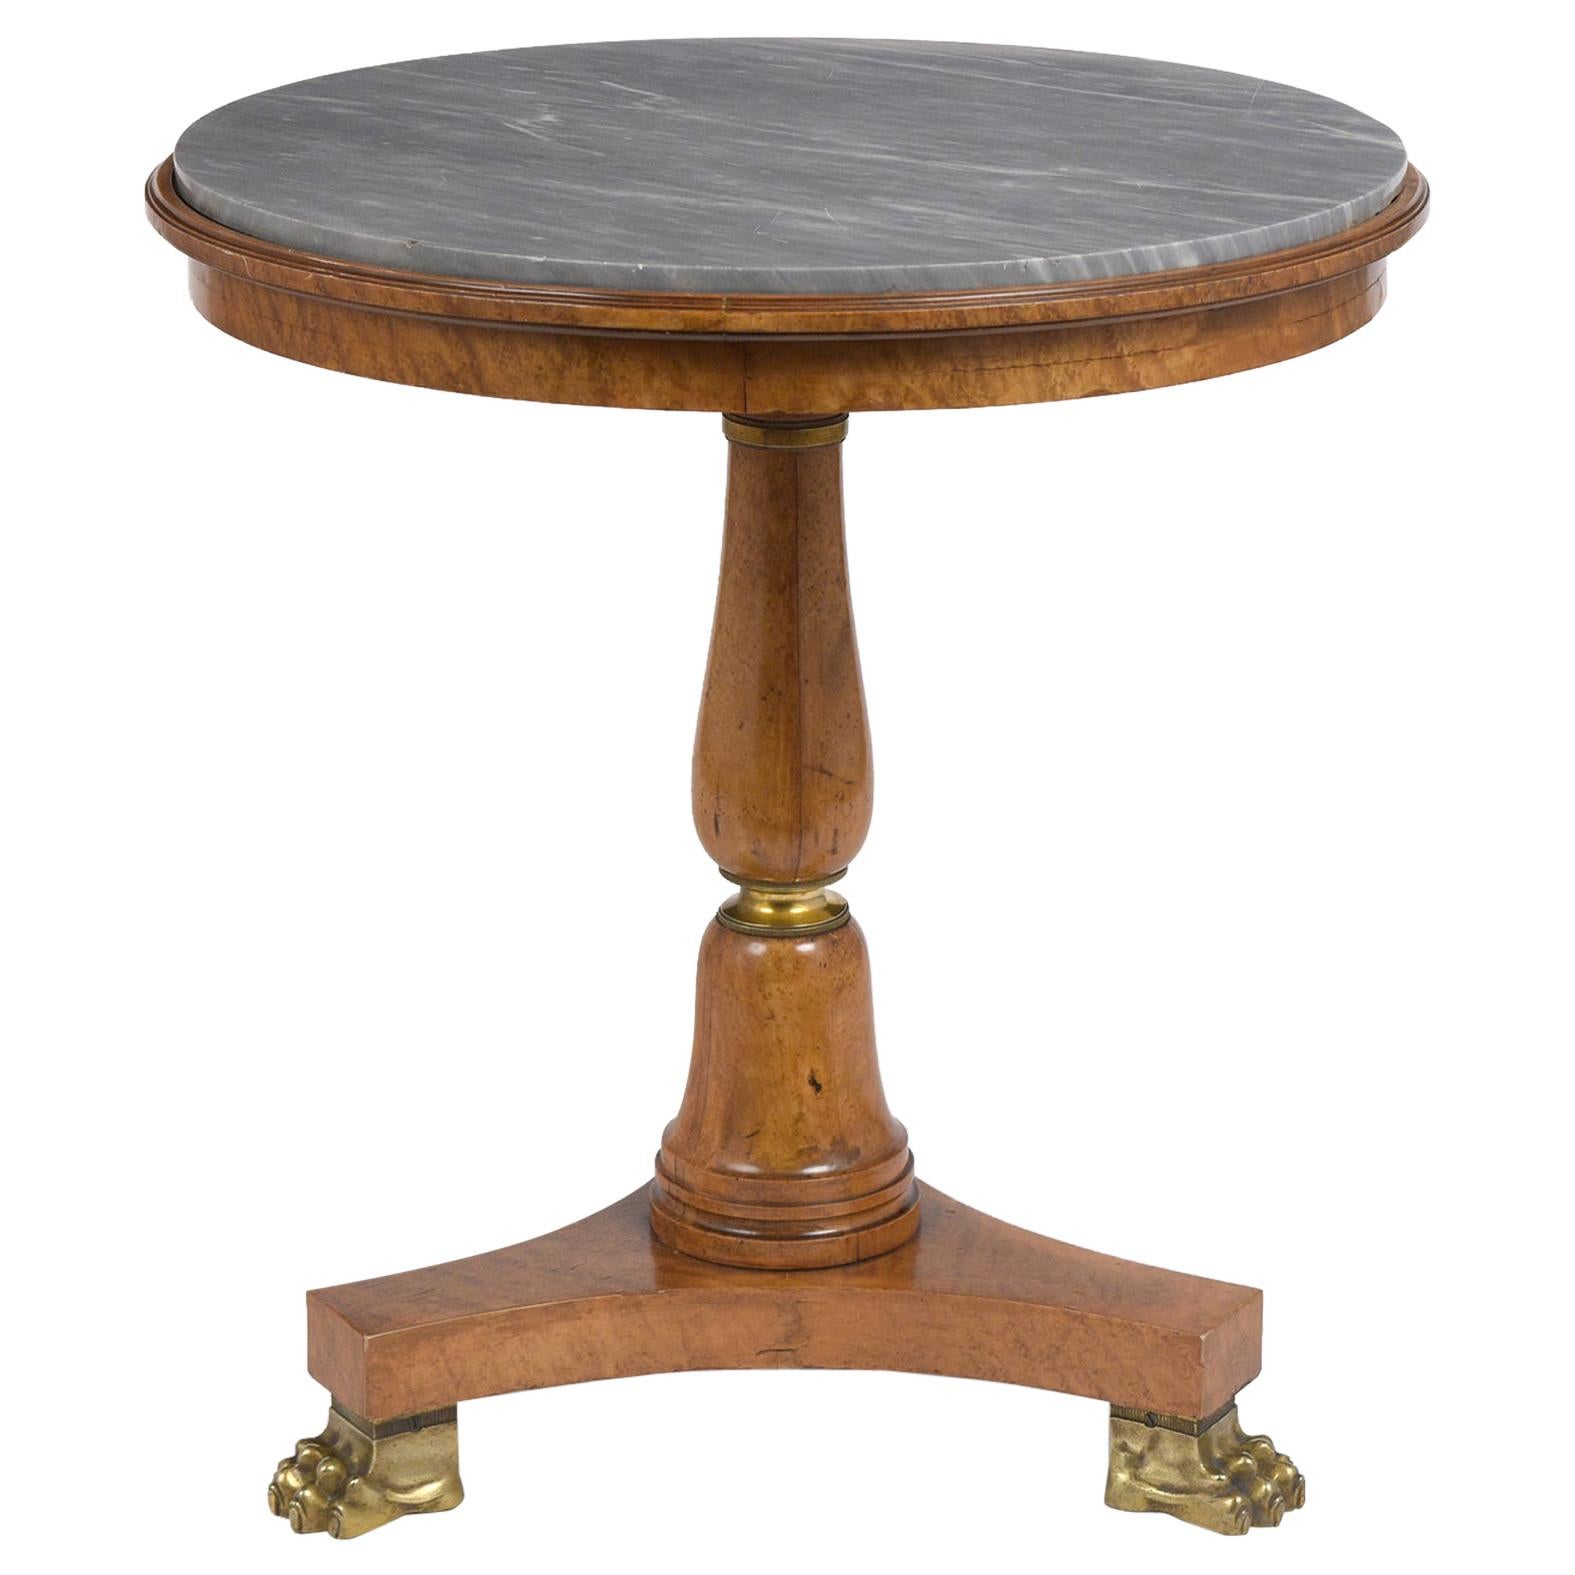  Circa 1830s French Empire Style Center Side Table